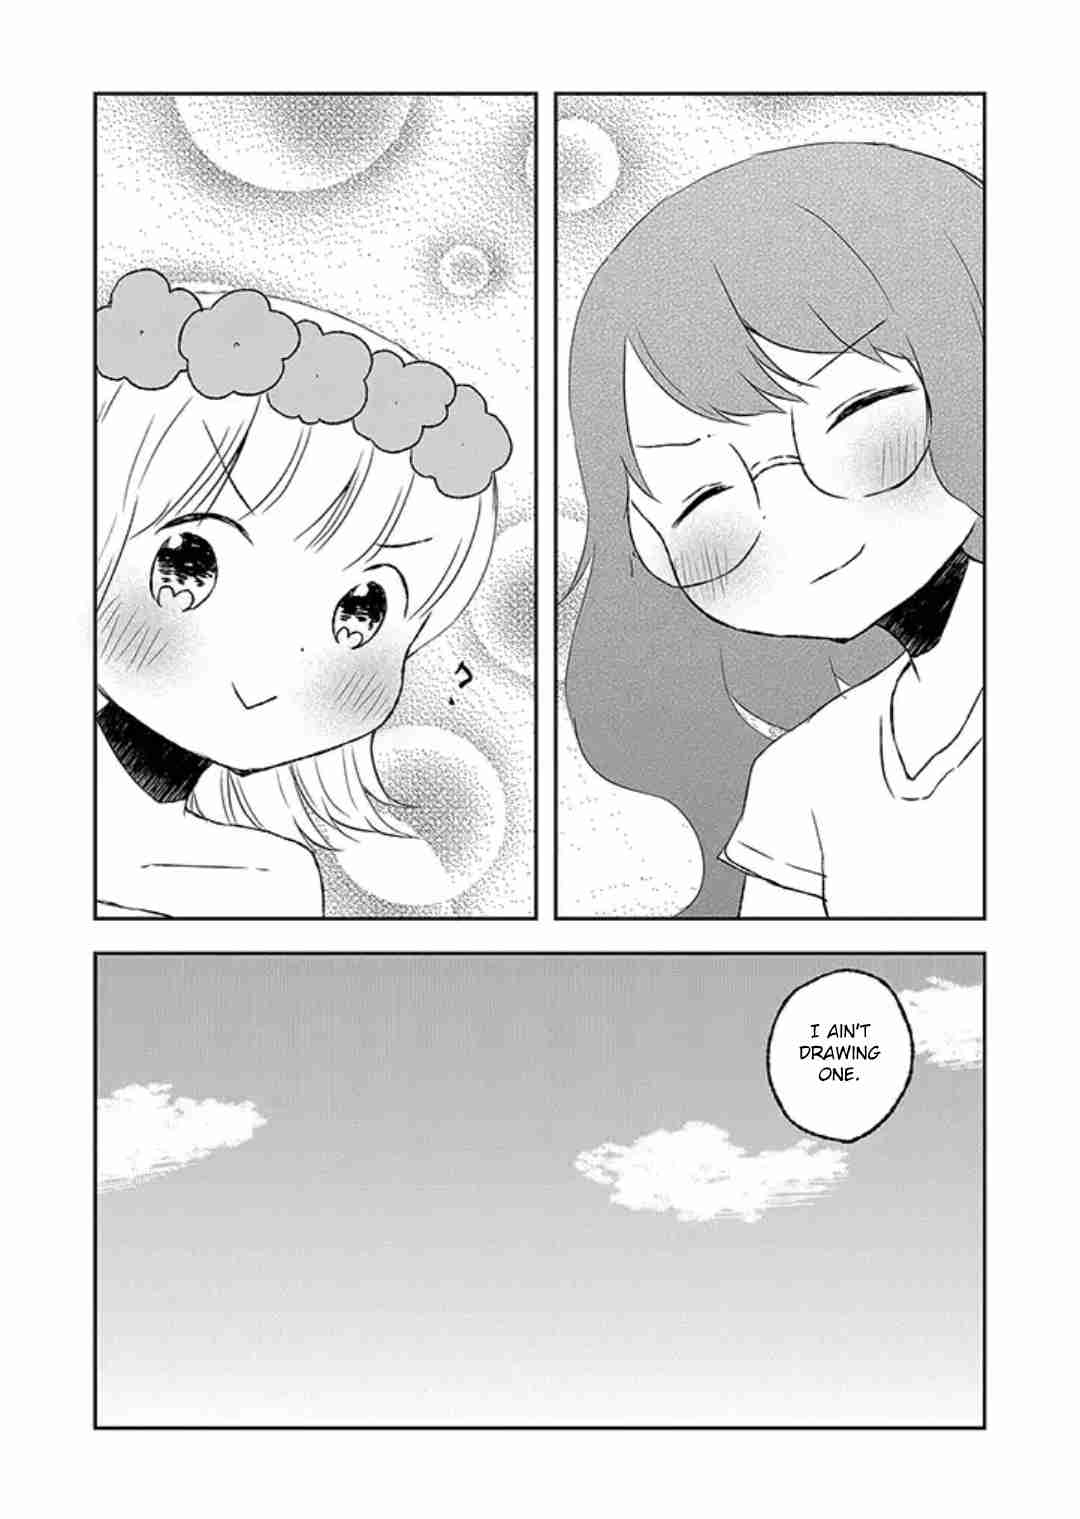 Let's Reconcile With Lily Maria Ch. 10 Yuri and Lily and Yuri